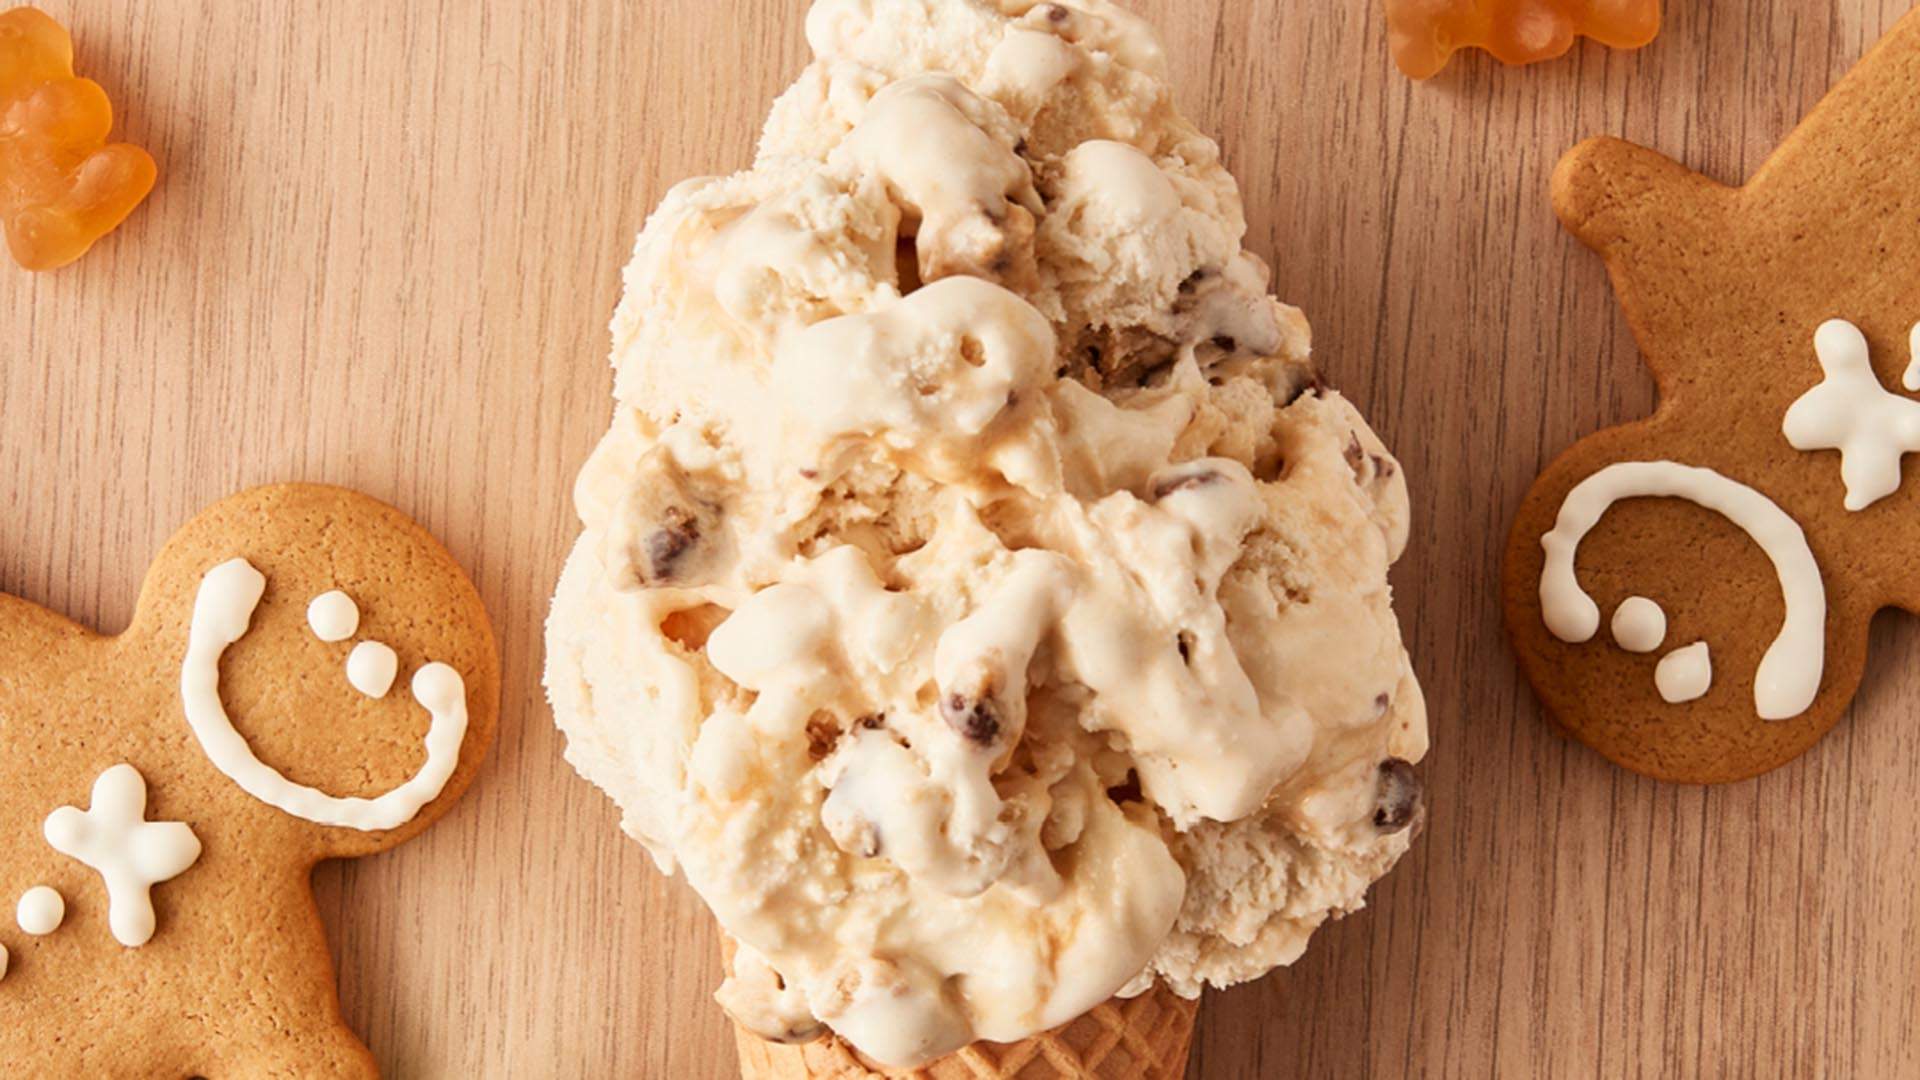 Gelatissimo Is Scooping Up Super-Festive Gingerbread Cookie Dough Gelato Just for This Month